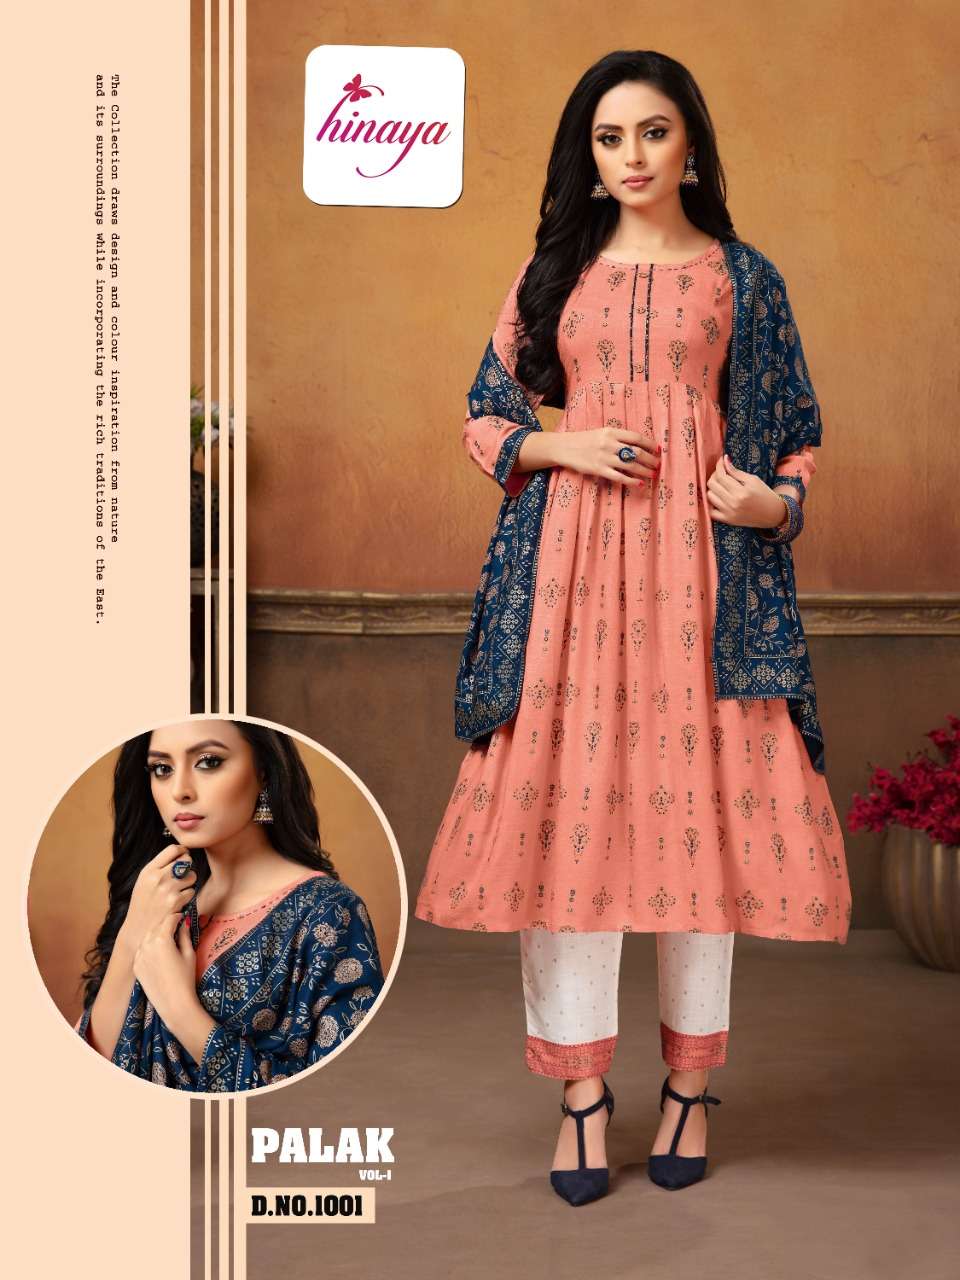 PALAK VOL-1 BY HINAYA 1001 TO 1005 SERIES BEAUTIFUL SUITS COLORFUL STYLISH FANCY CASUAL WEAR & ETHNIC WEAR RAYON PRINT DRESSES AT WHOLESALE PRICE